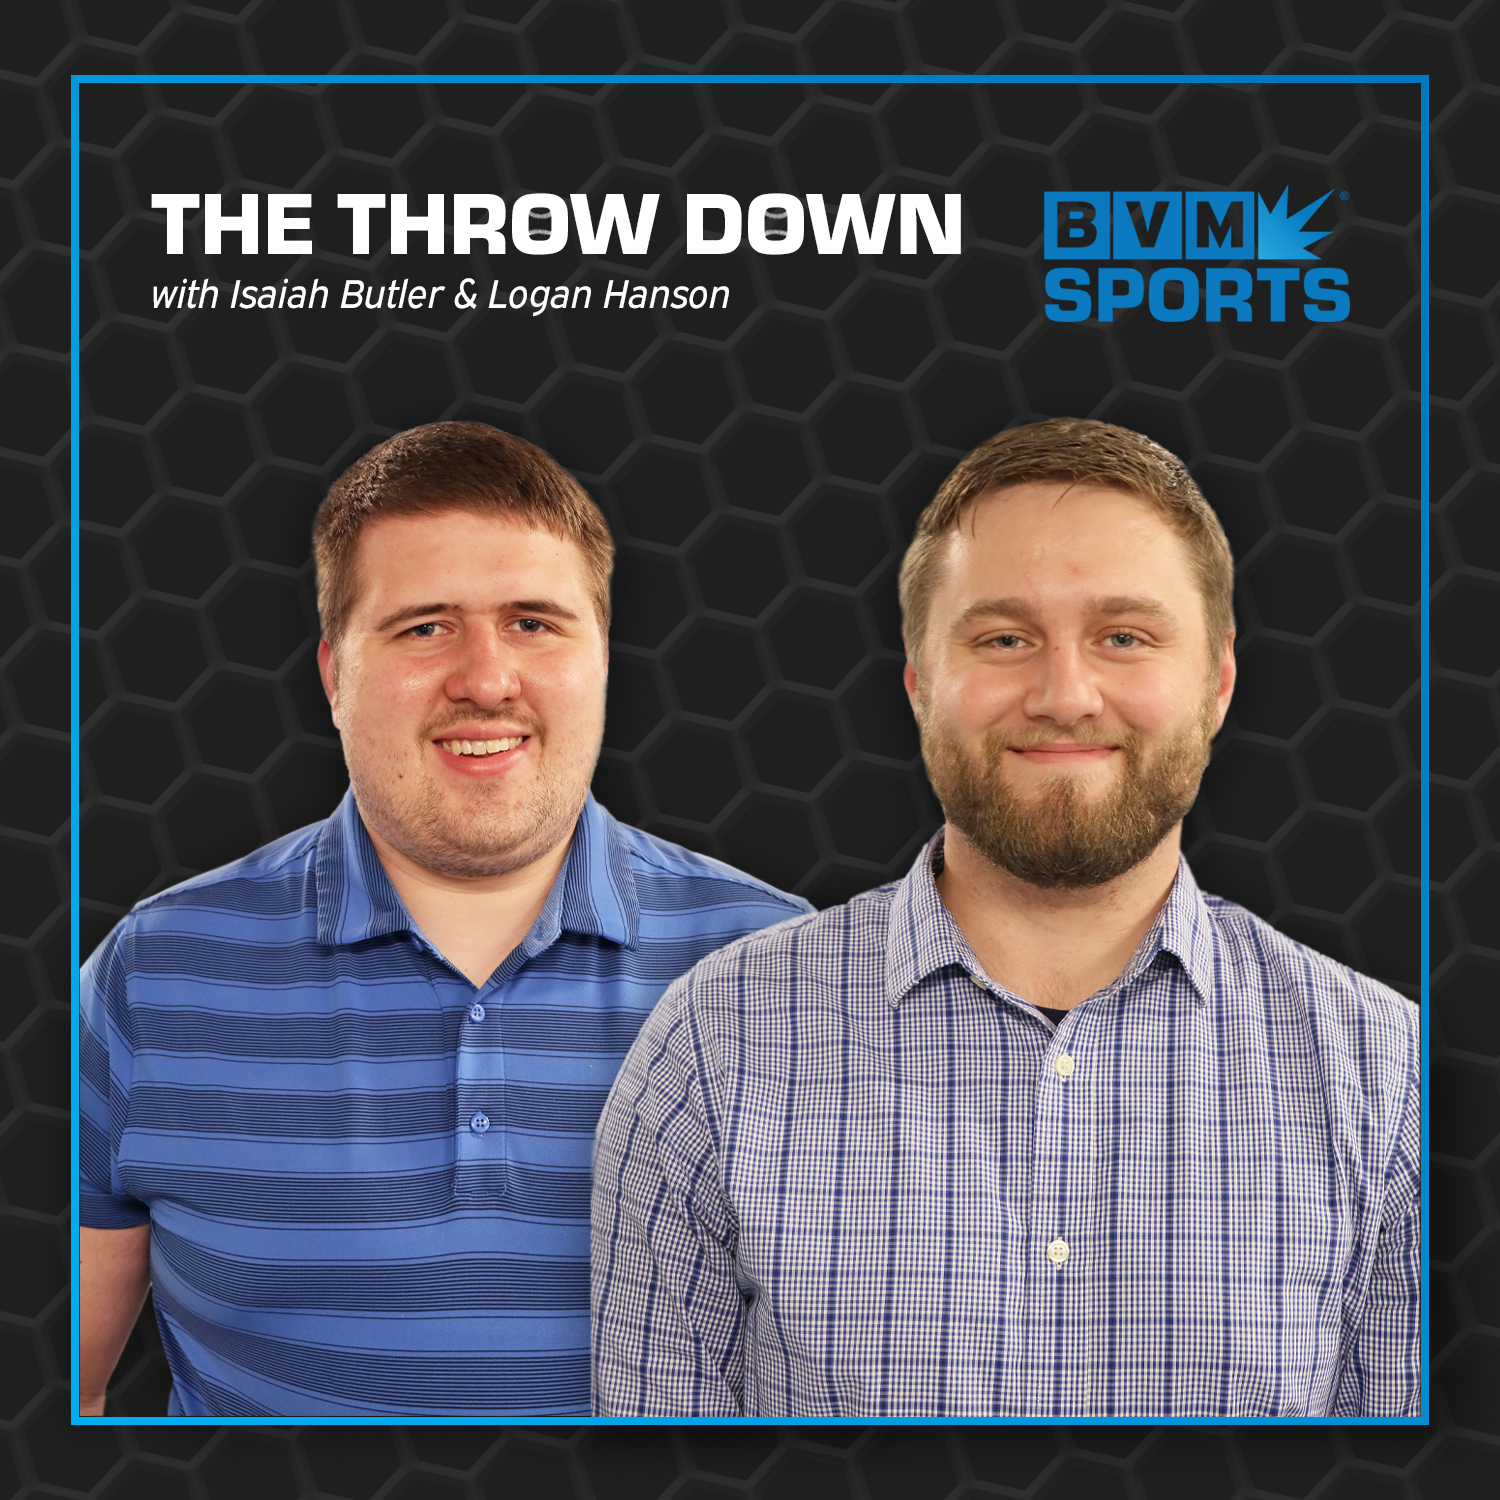 Artwork for podcast The Throw Down